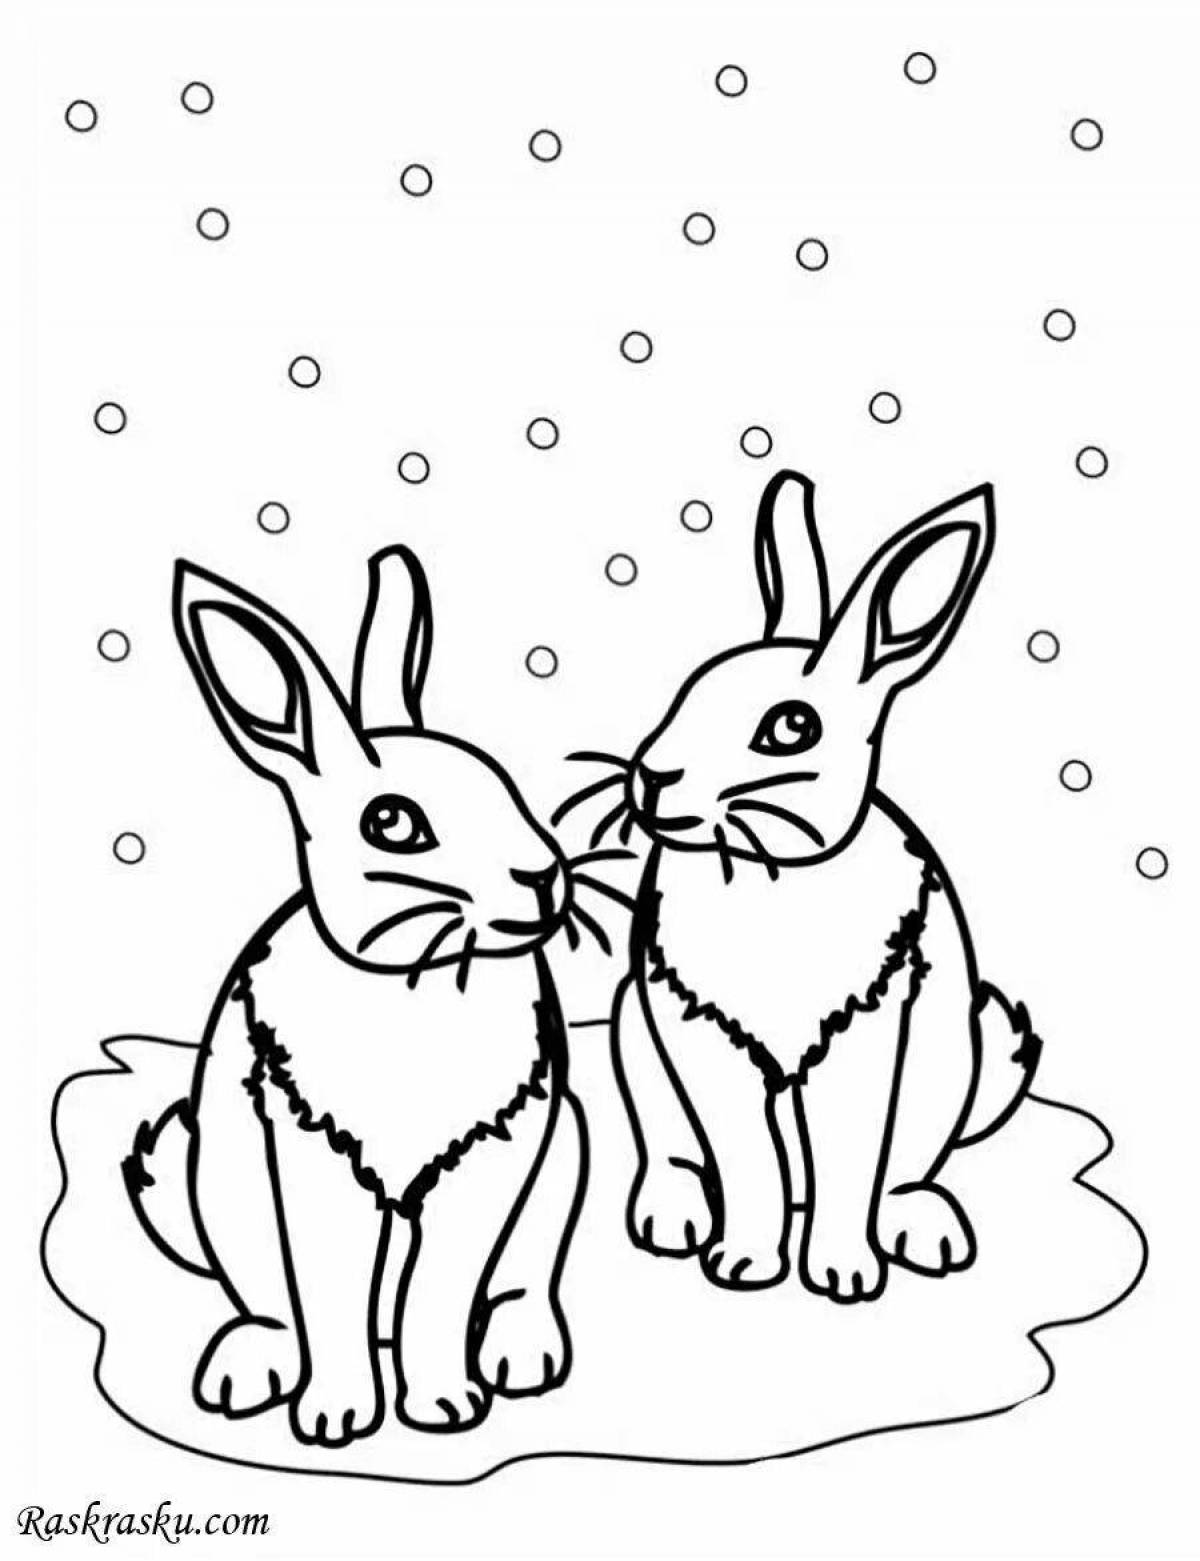 Exotic animal coloring pages for kids in winter